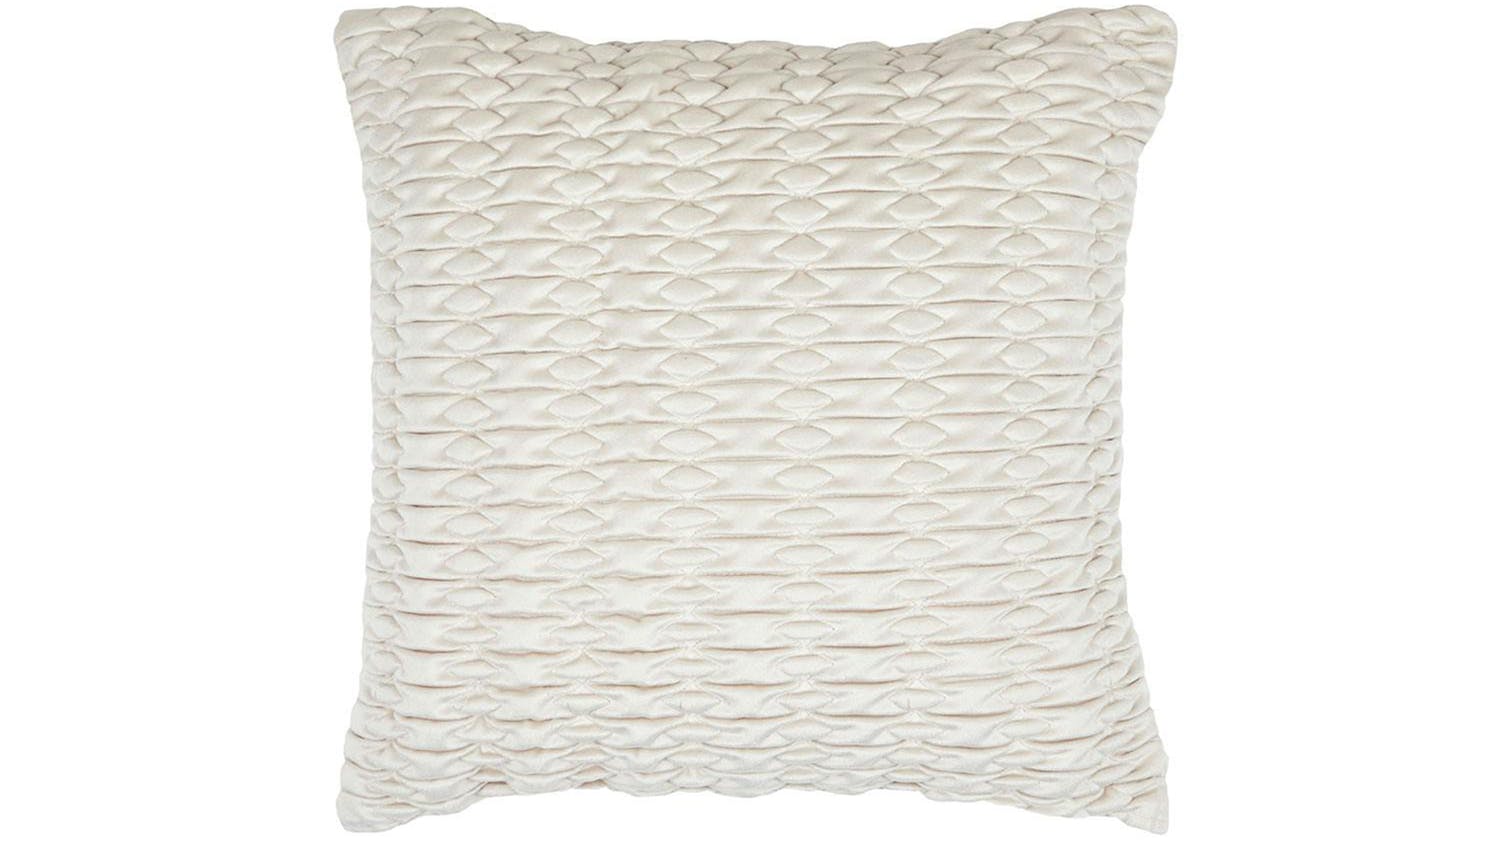 Loxton Square Cushion by Private Collection - Champagne